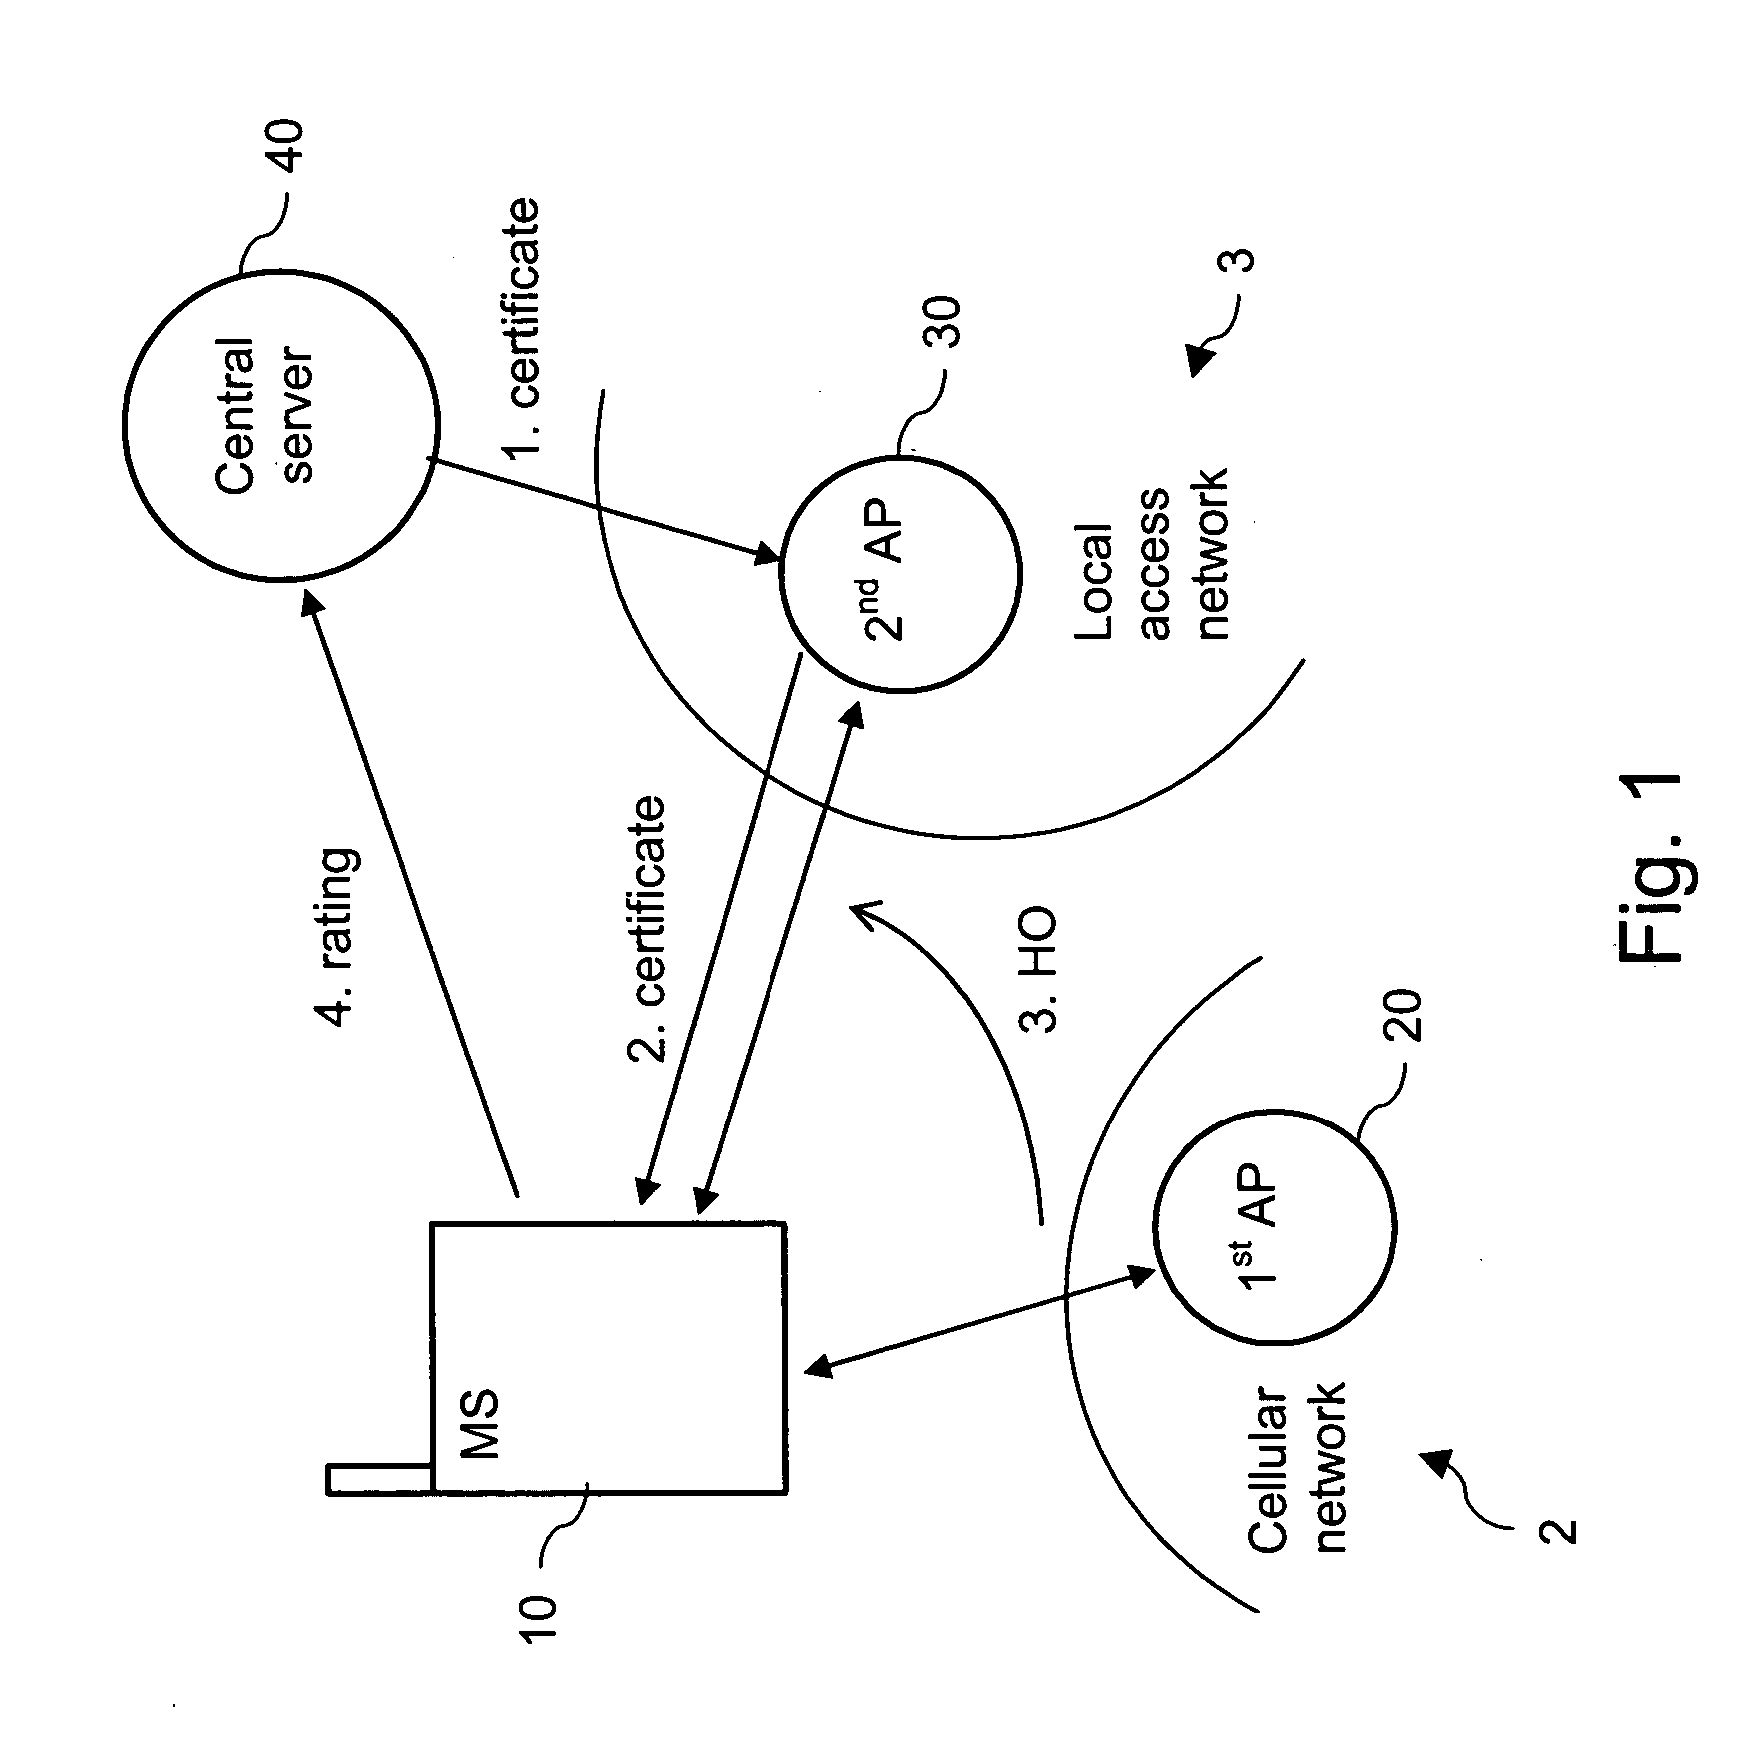 Supporting a decision by a mobile terminal whether to use an available access point